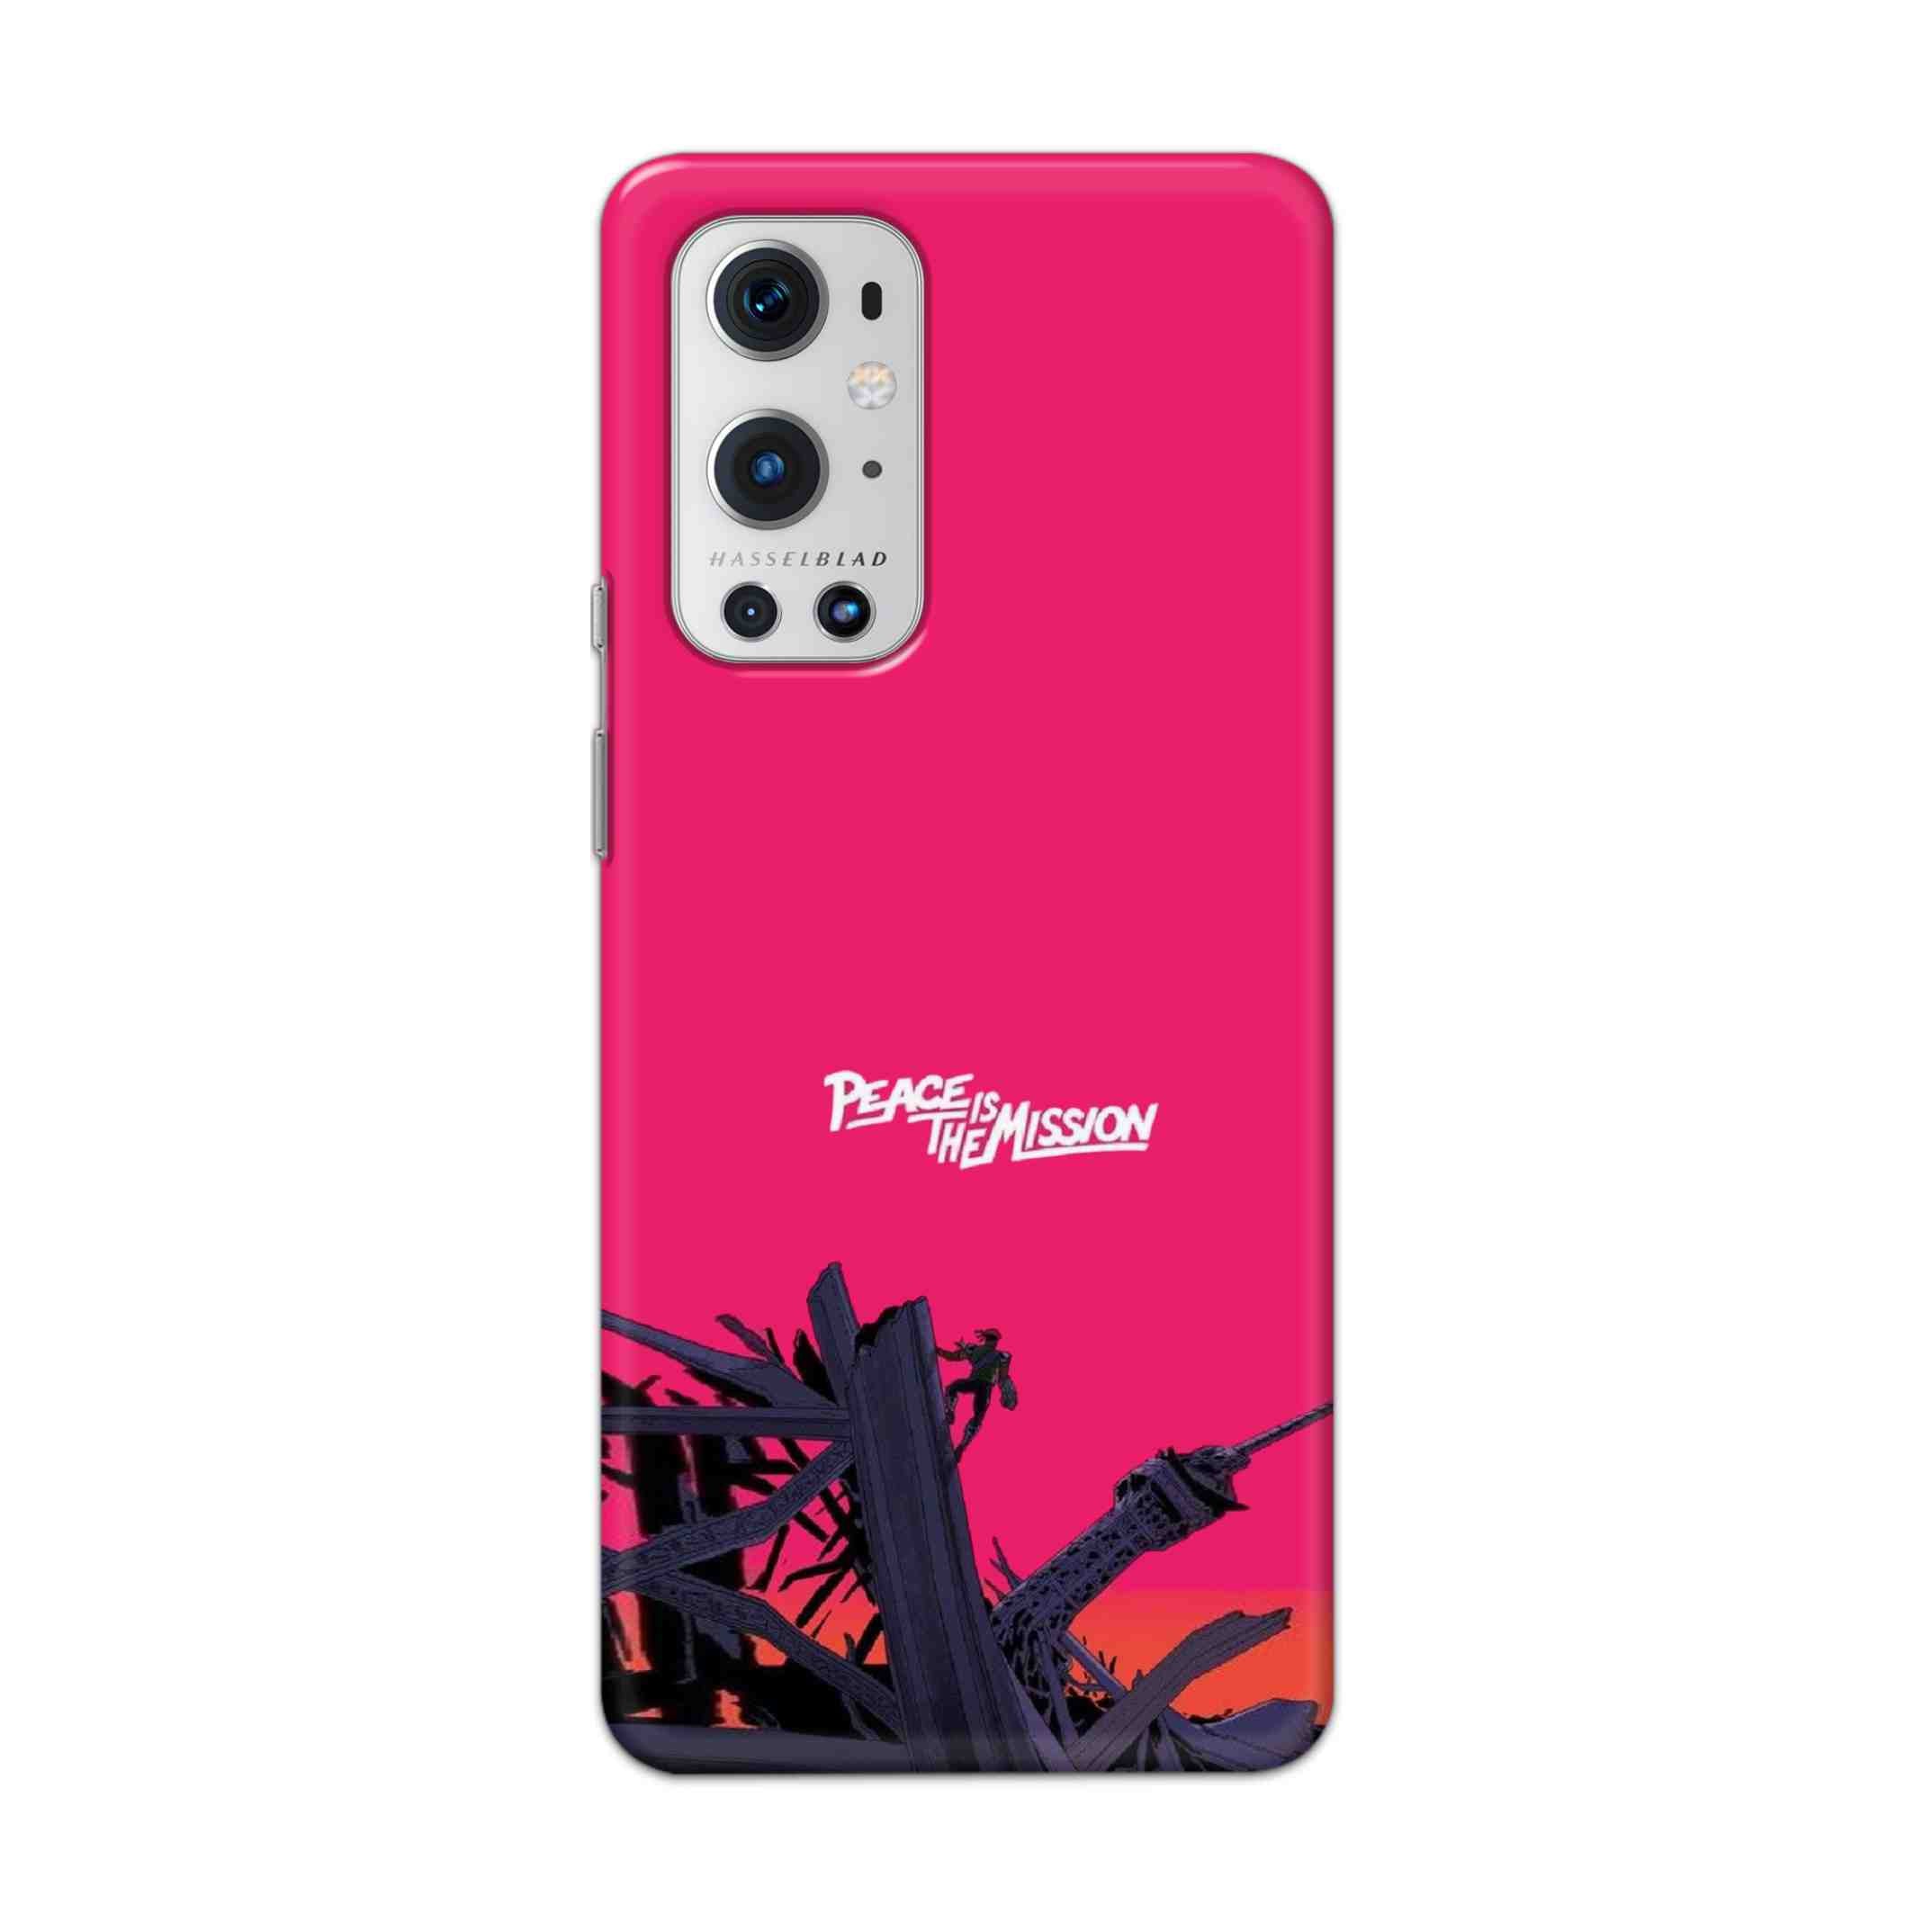 Buy Peace Is The Mission Hard Back Mobile Phone Case Cover For OnePlus 9 Pro Online